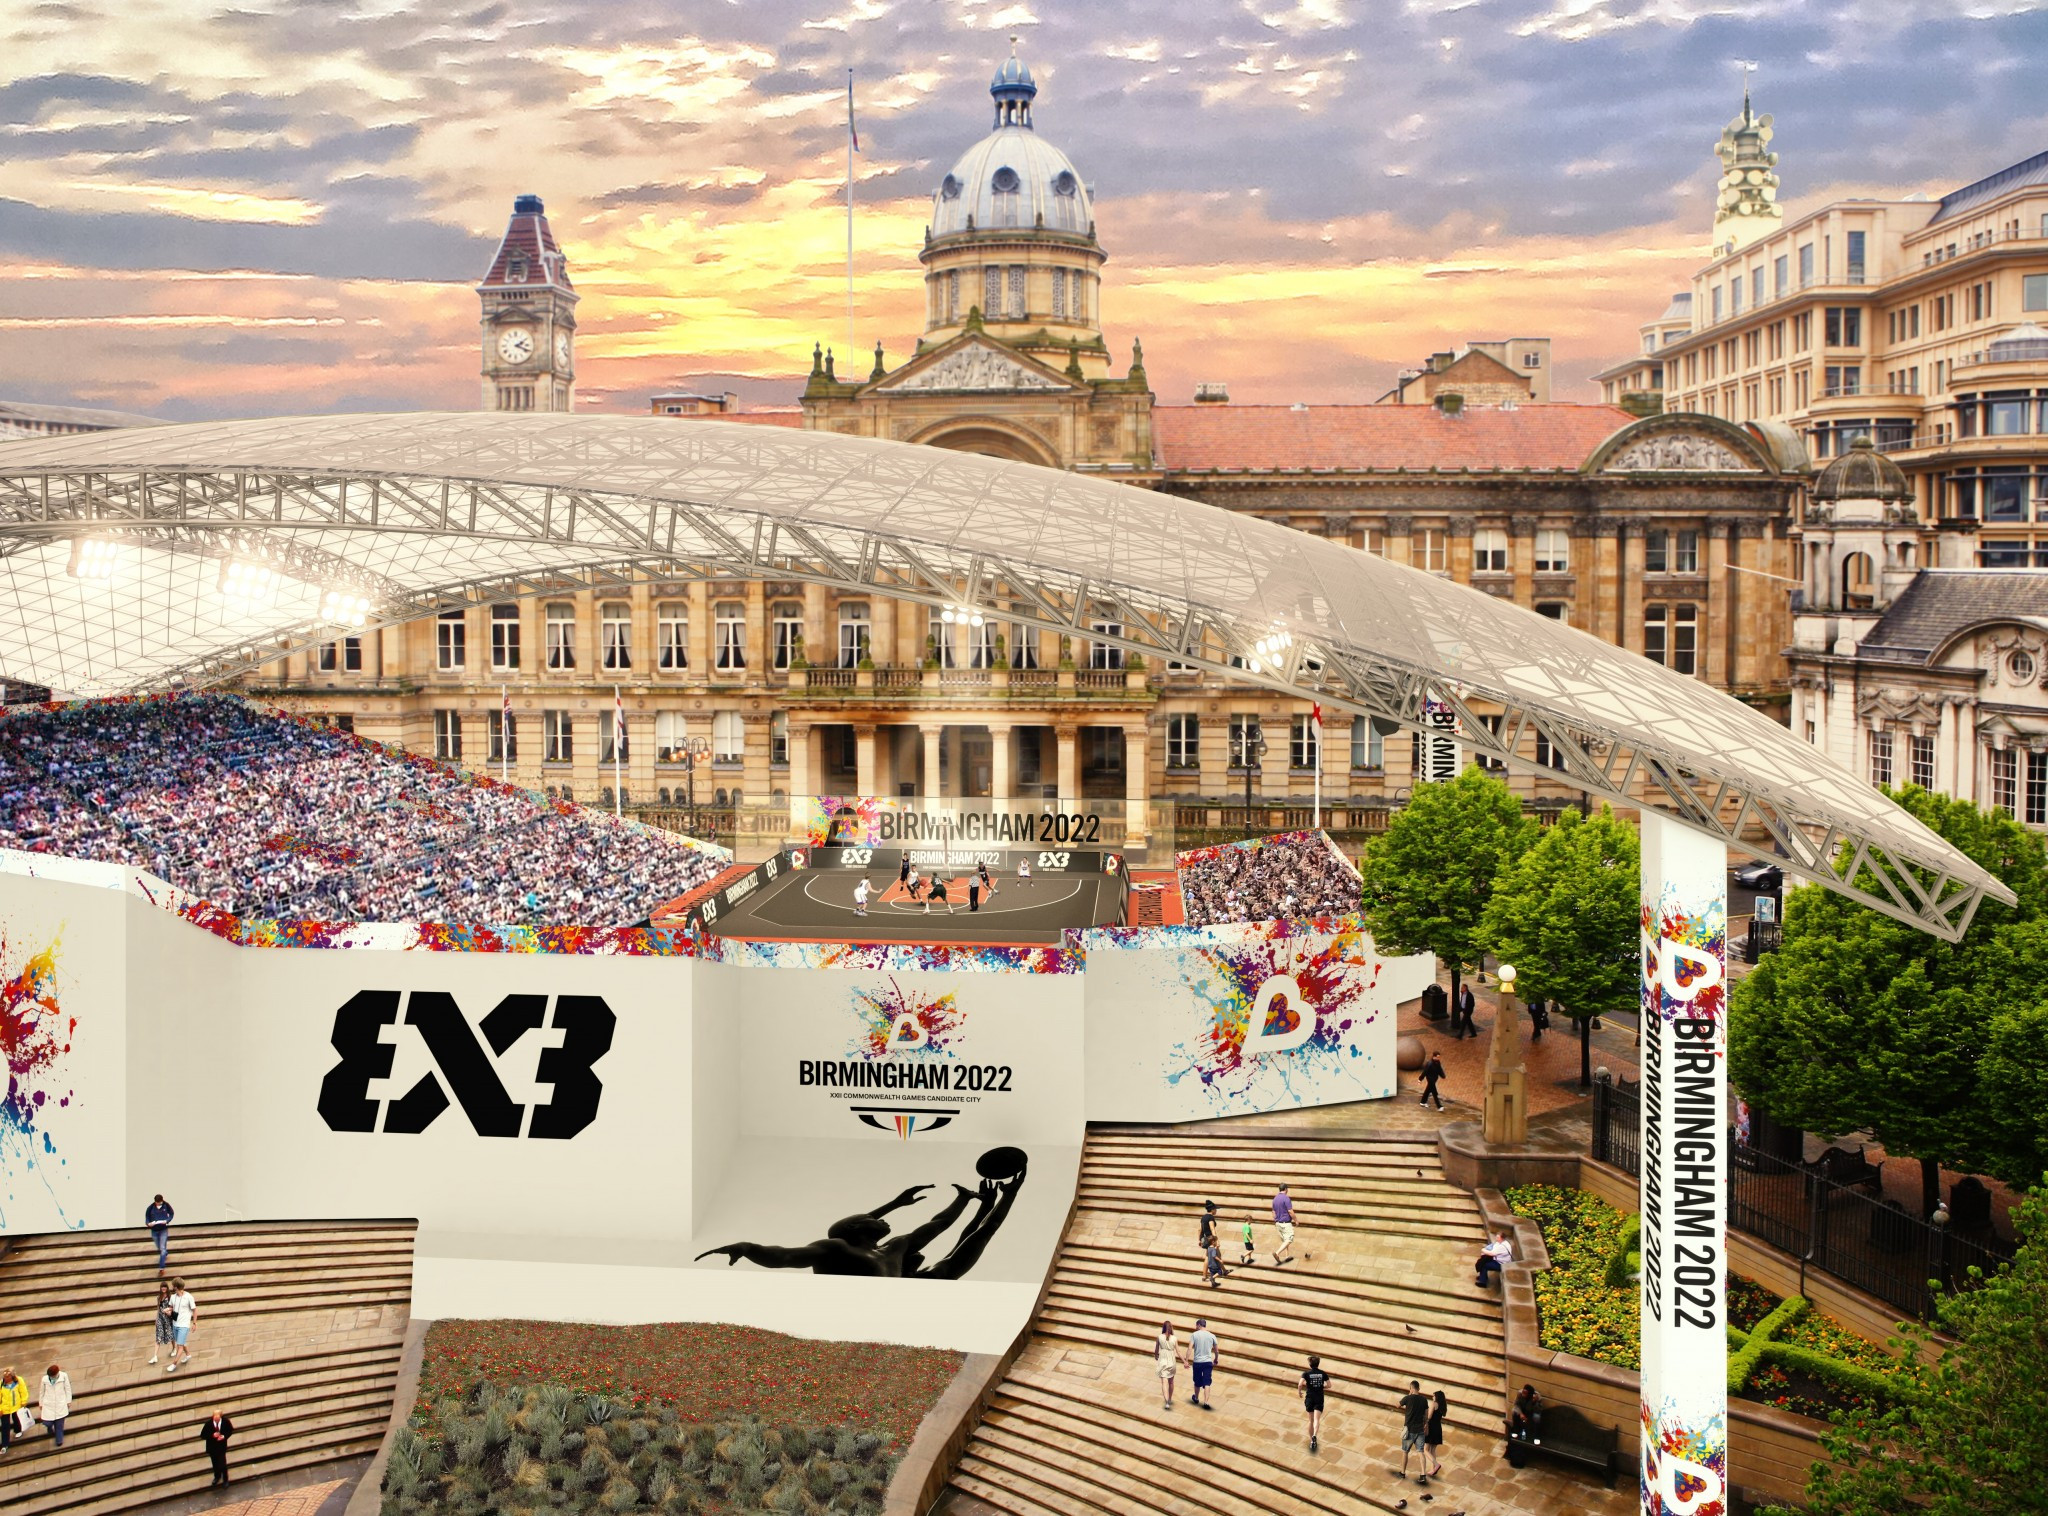 Victoria Square was outlined as the 3x3 basketball venue in Birmingham 2022's bid plan ©Birmingham 2022